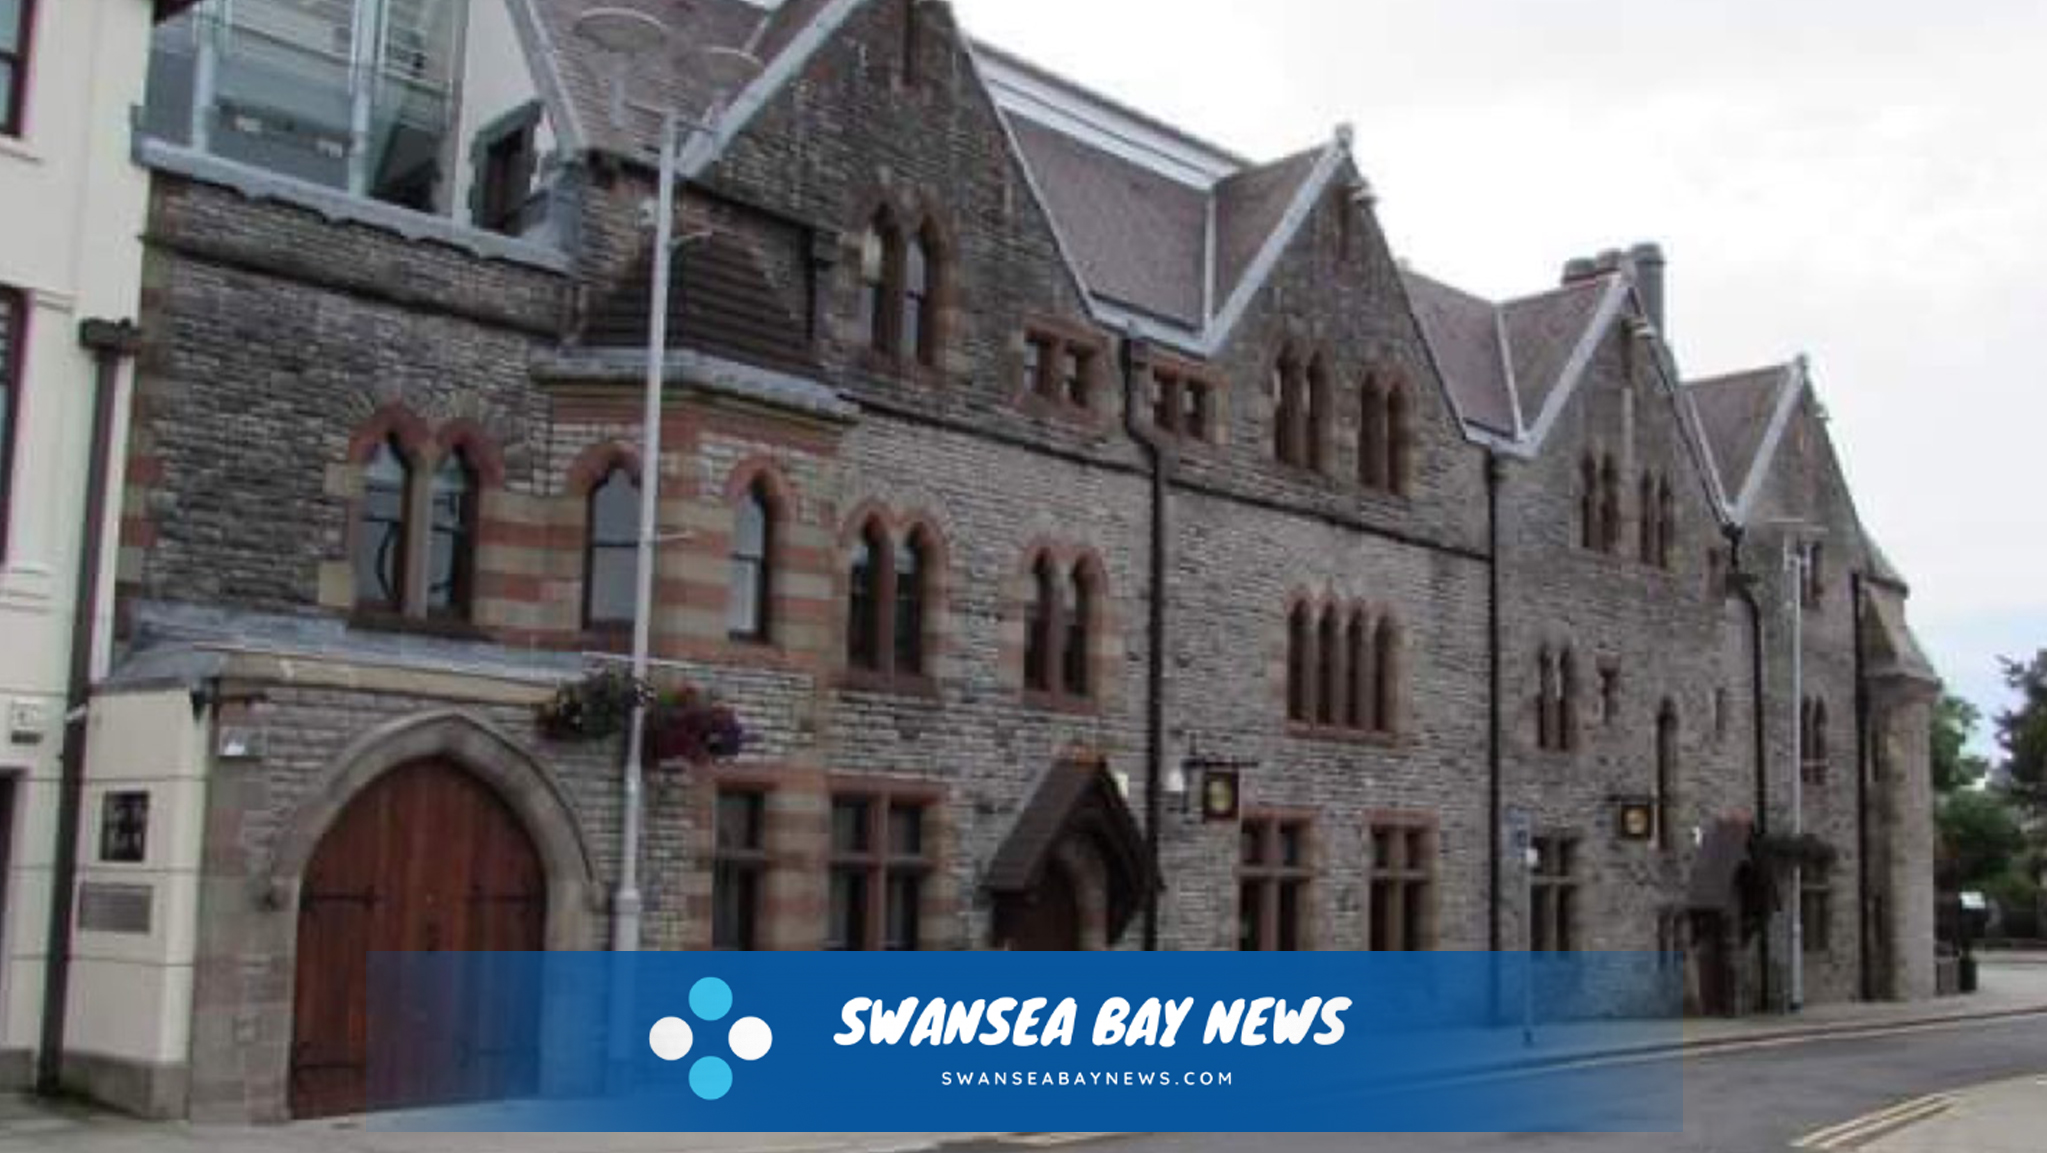 We're Featured in Swansea Bay News!